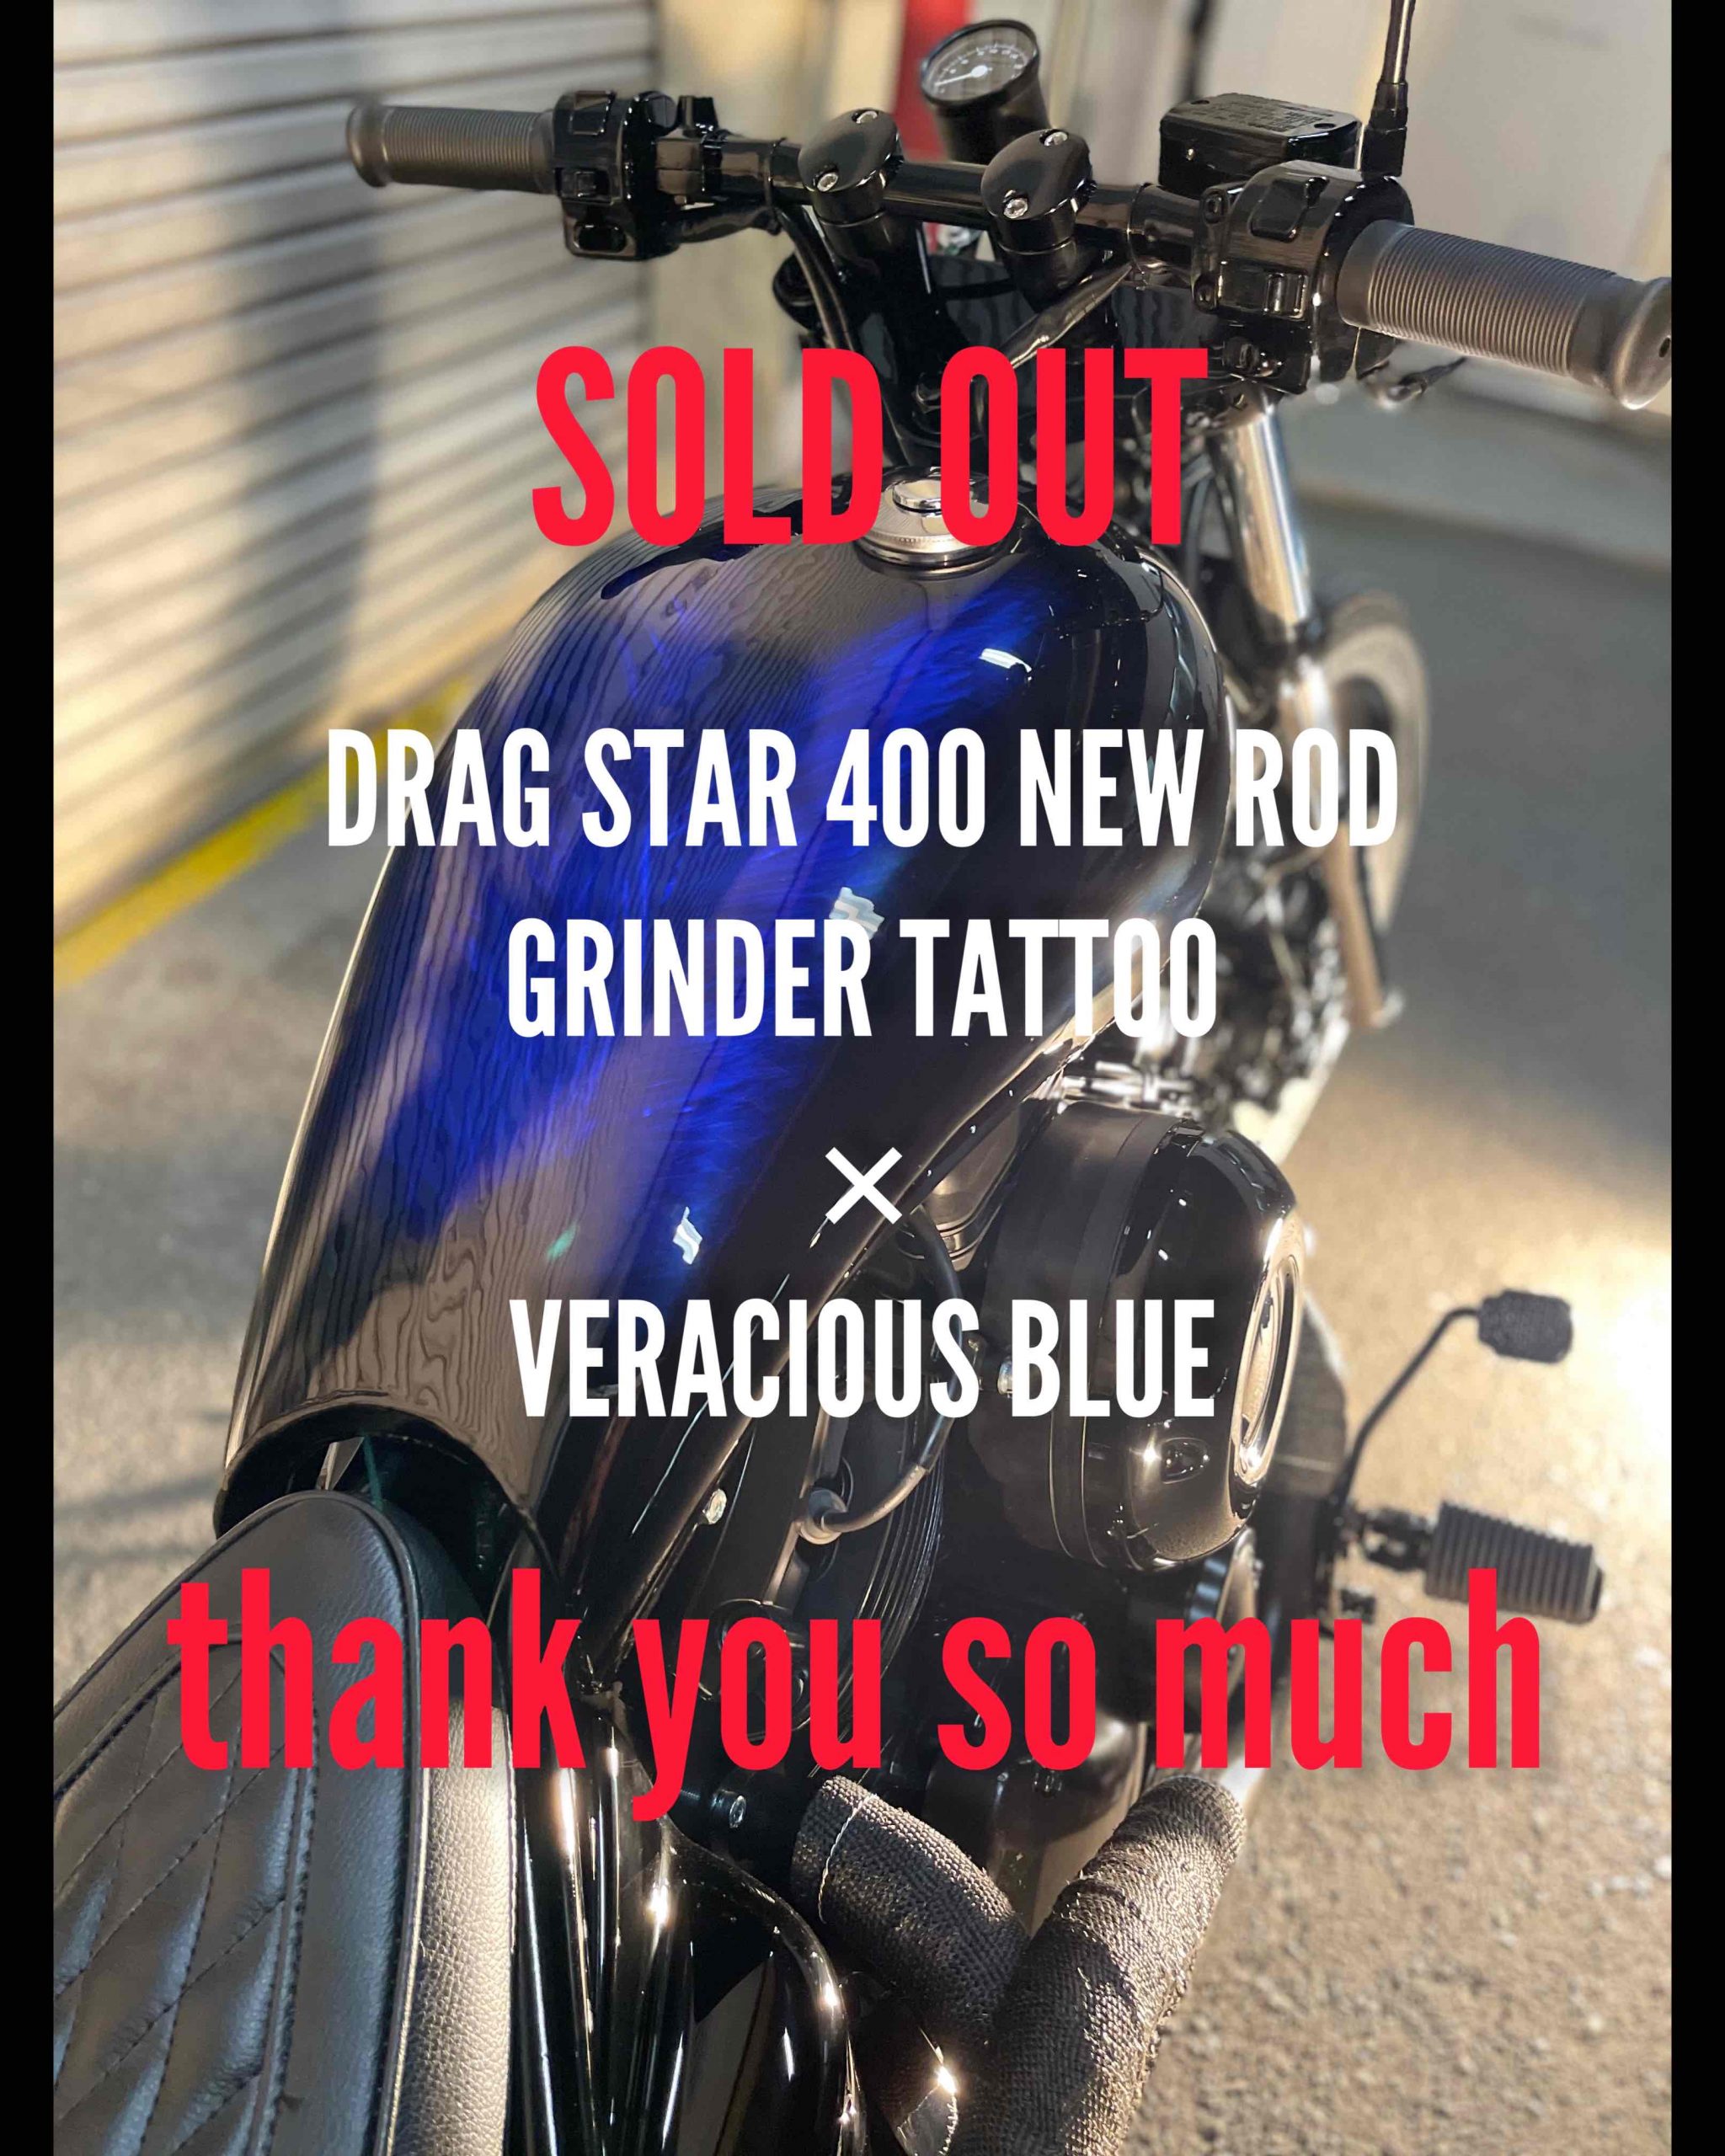 DRAG STAR NEW ROD GRINDER TATTOO×VERACIOUS BLUEご成約ありがとうございました☆